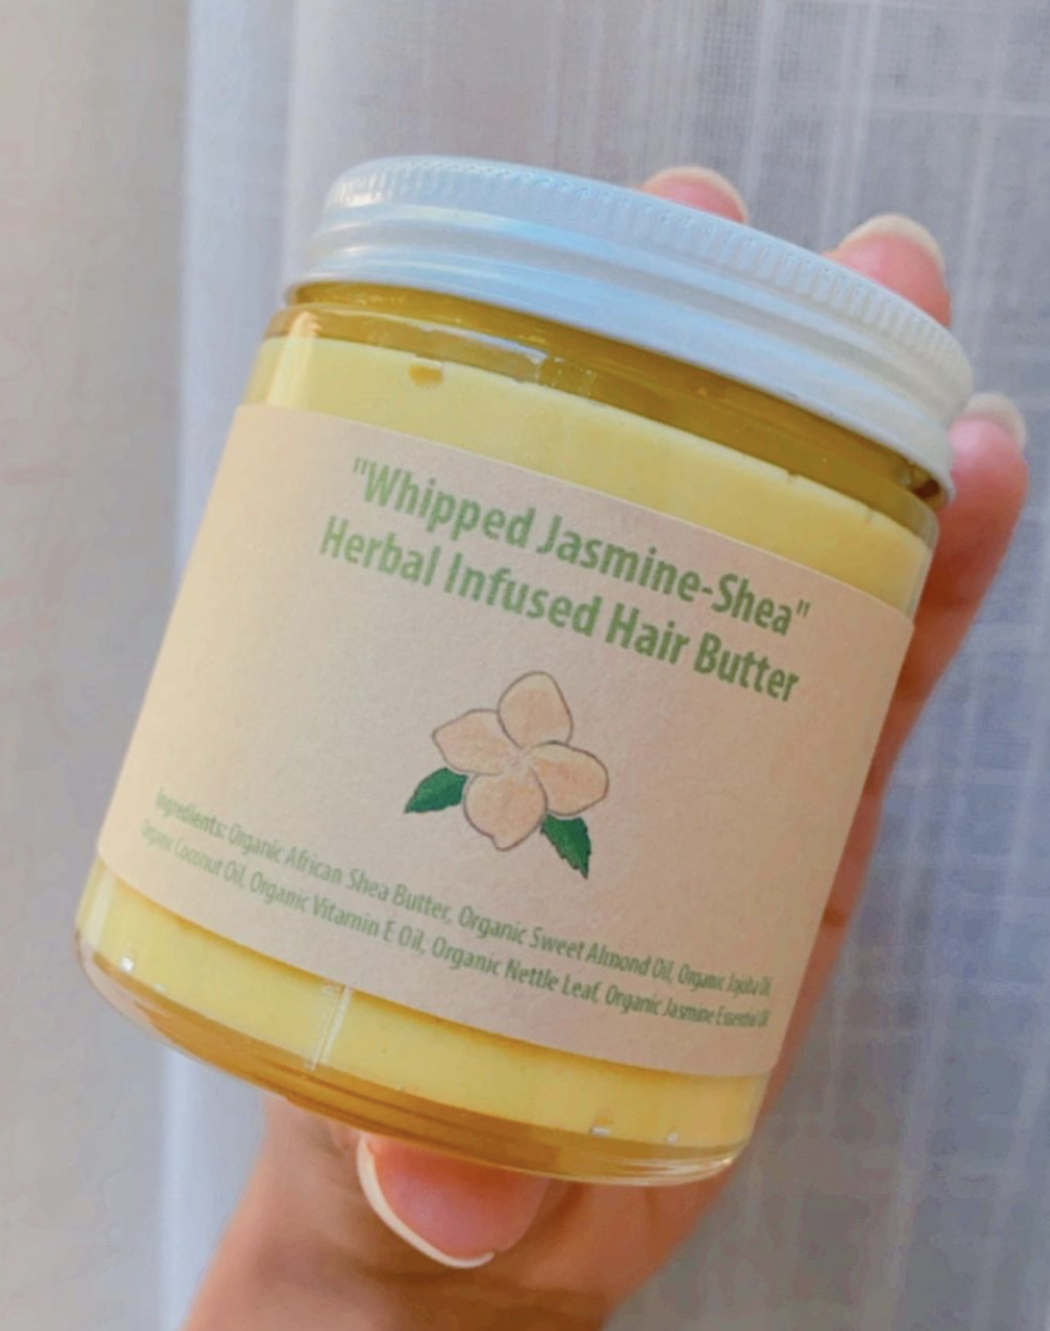 "Whipped Jasmine-Shea" Herbal Infused Hair Butter